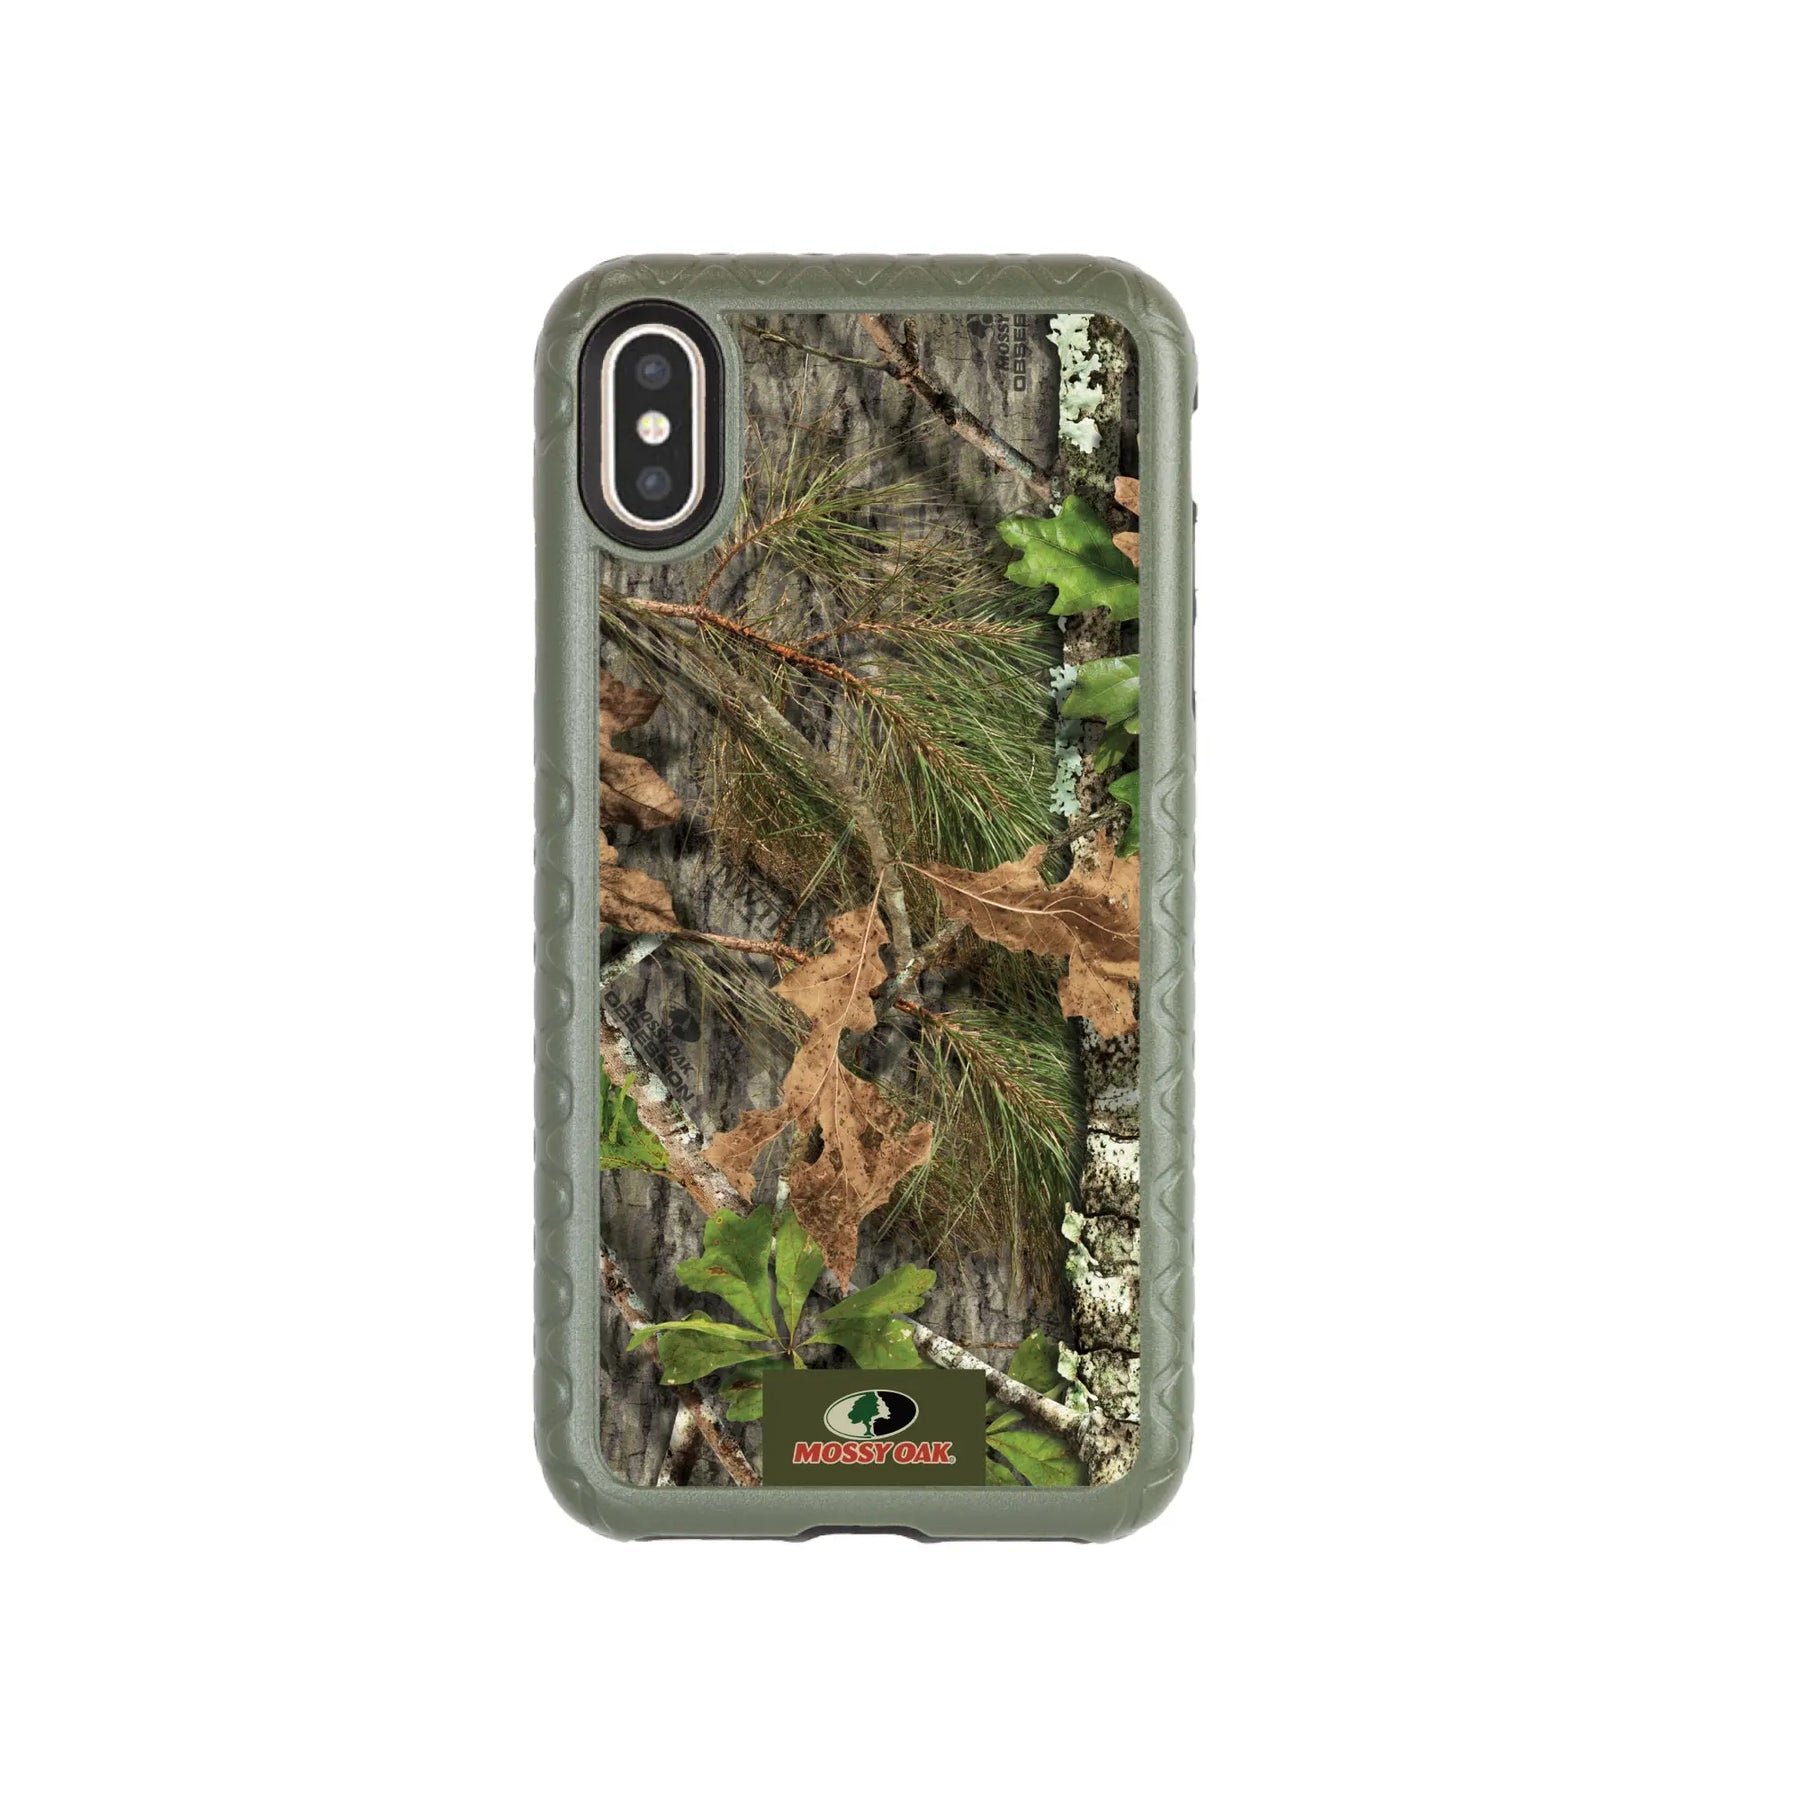 Mossy Oak Fortitude Series for Apple iPhone XS Max - Obsession - Custom Case - OliveDrabGreen - cellhelmet